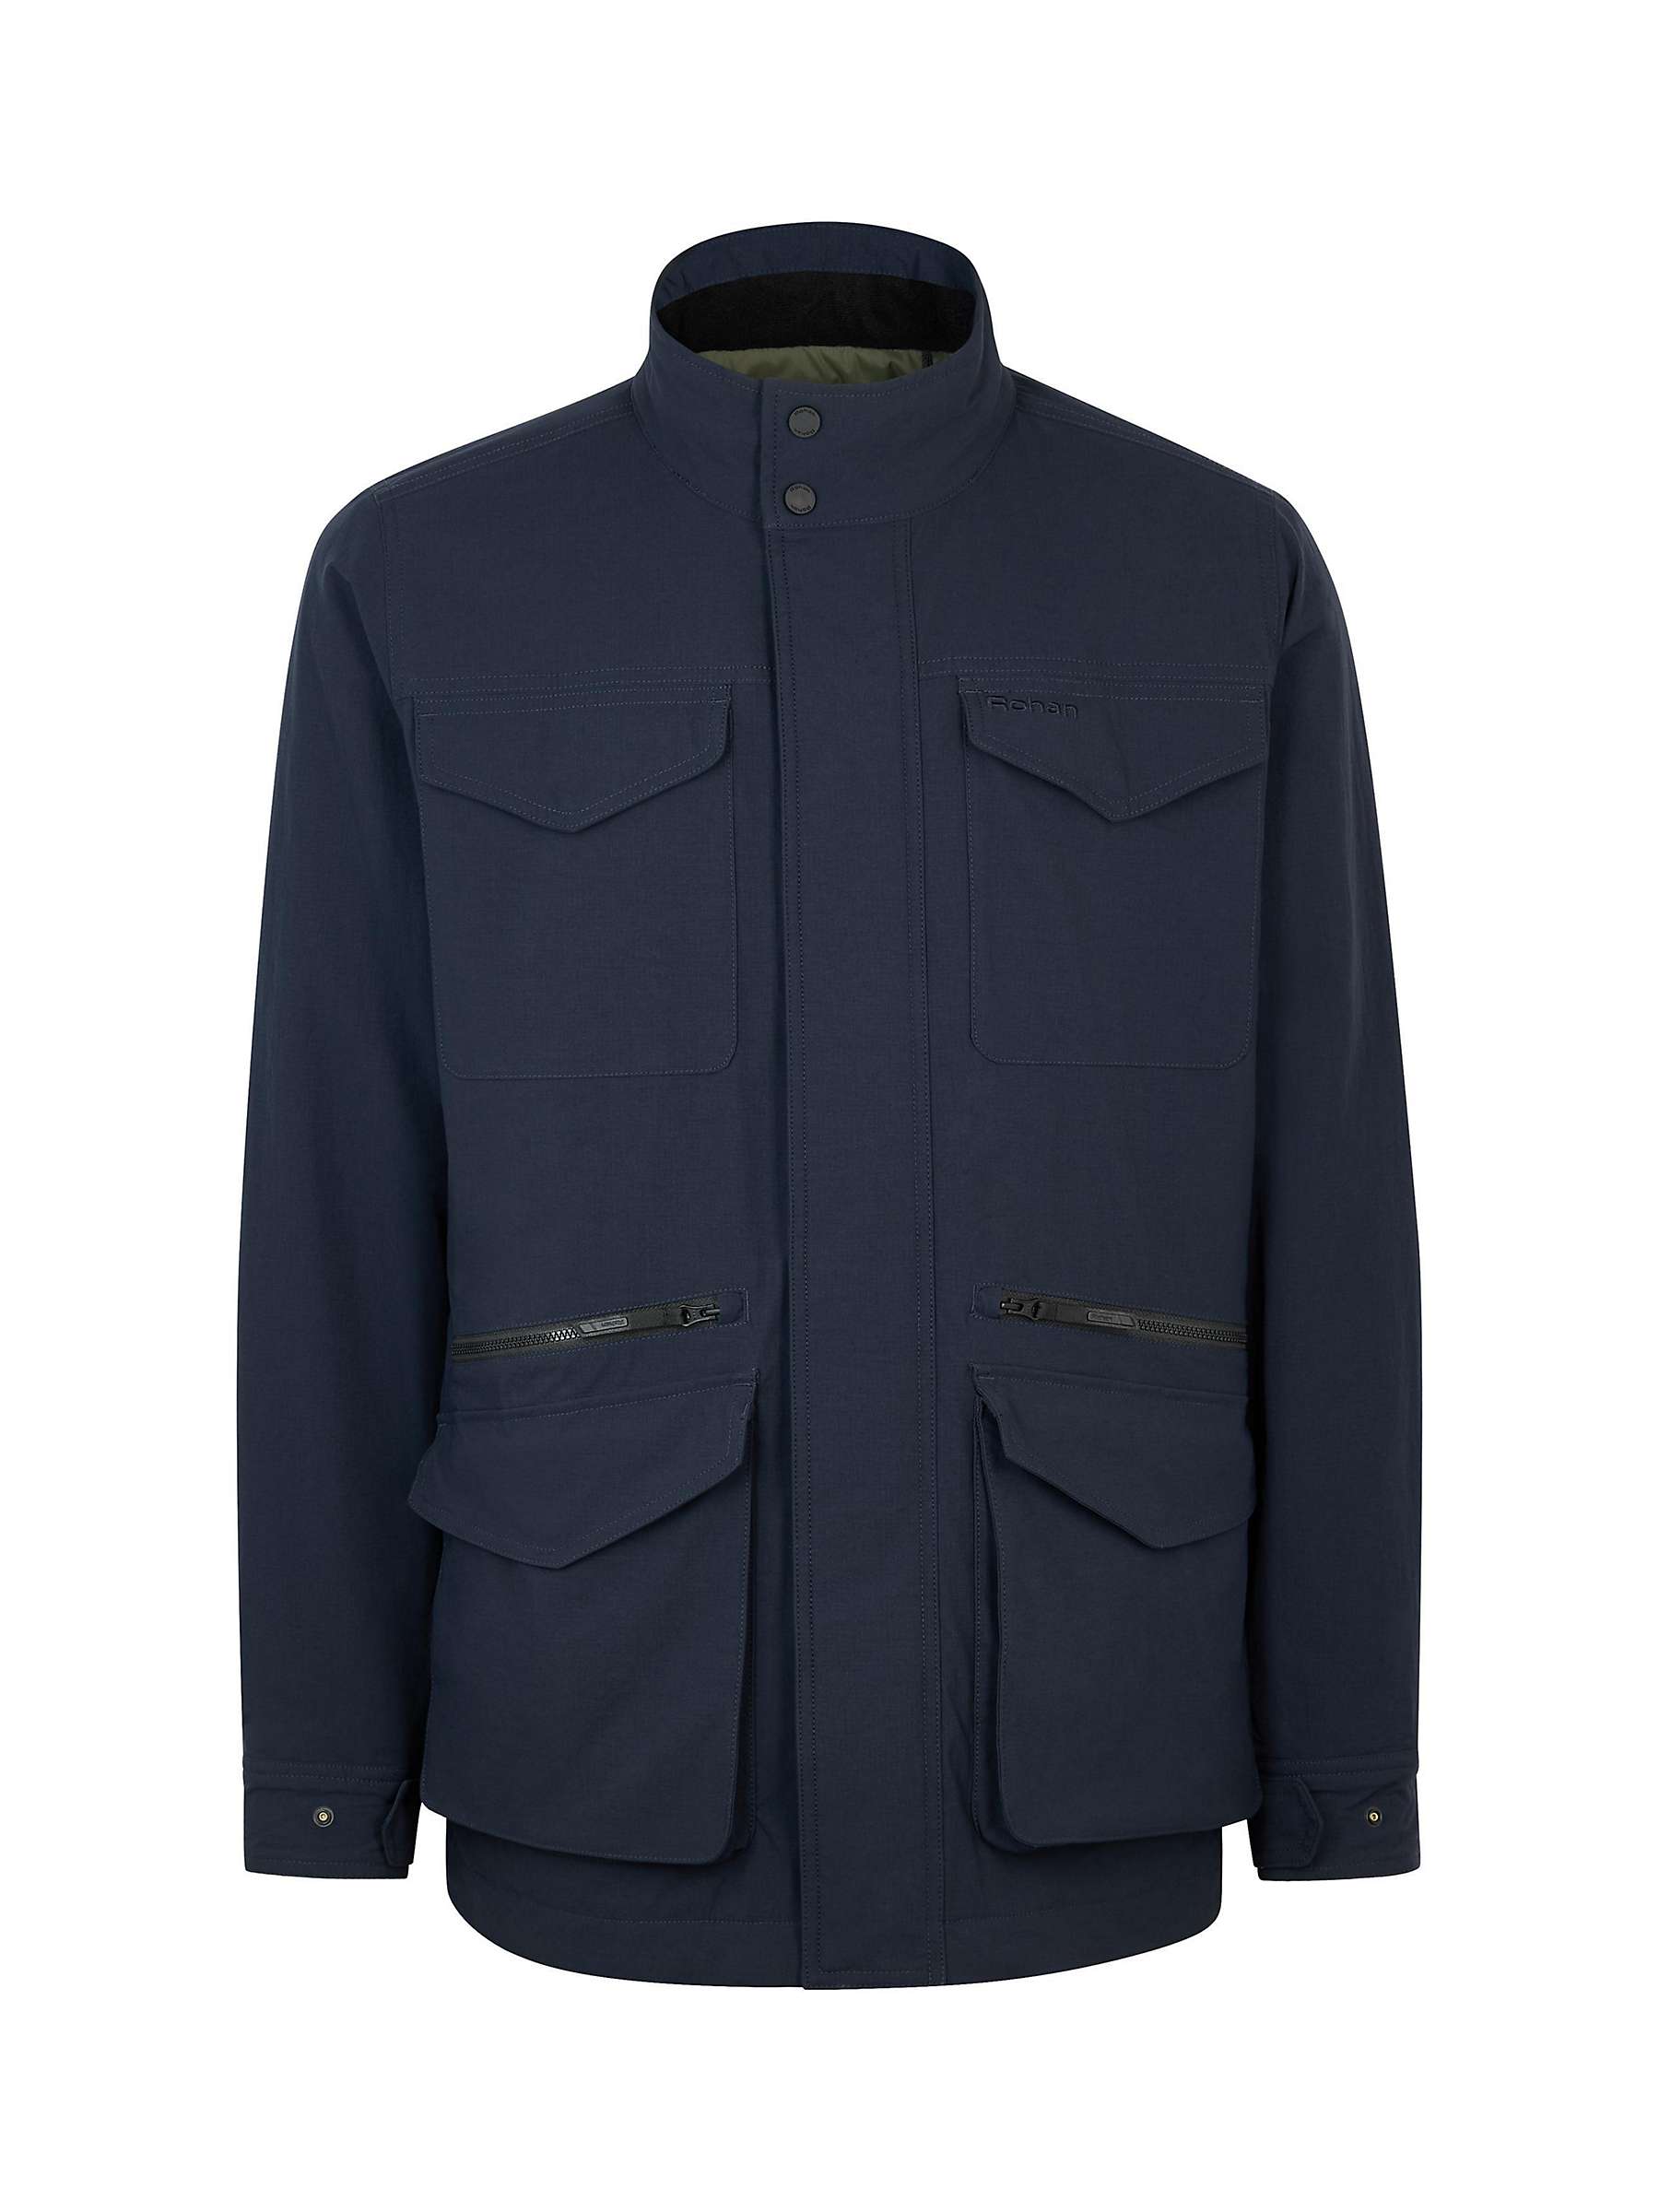 Rohan Field Men's Insulated Jacket at John Lewis & Partners